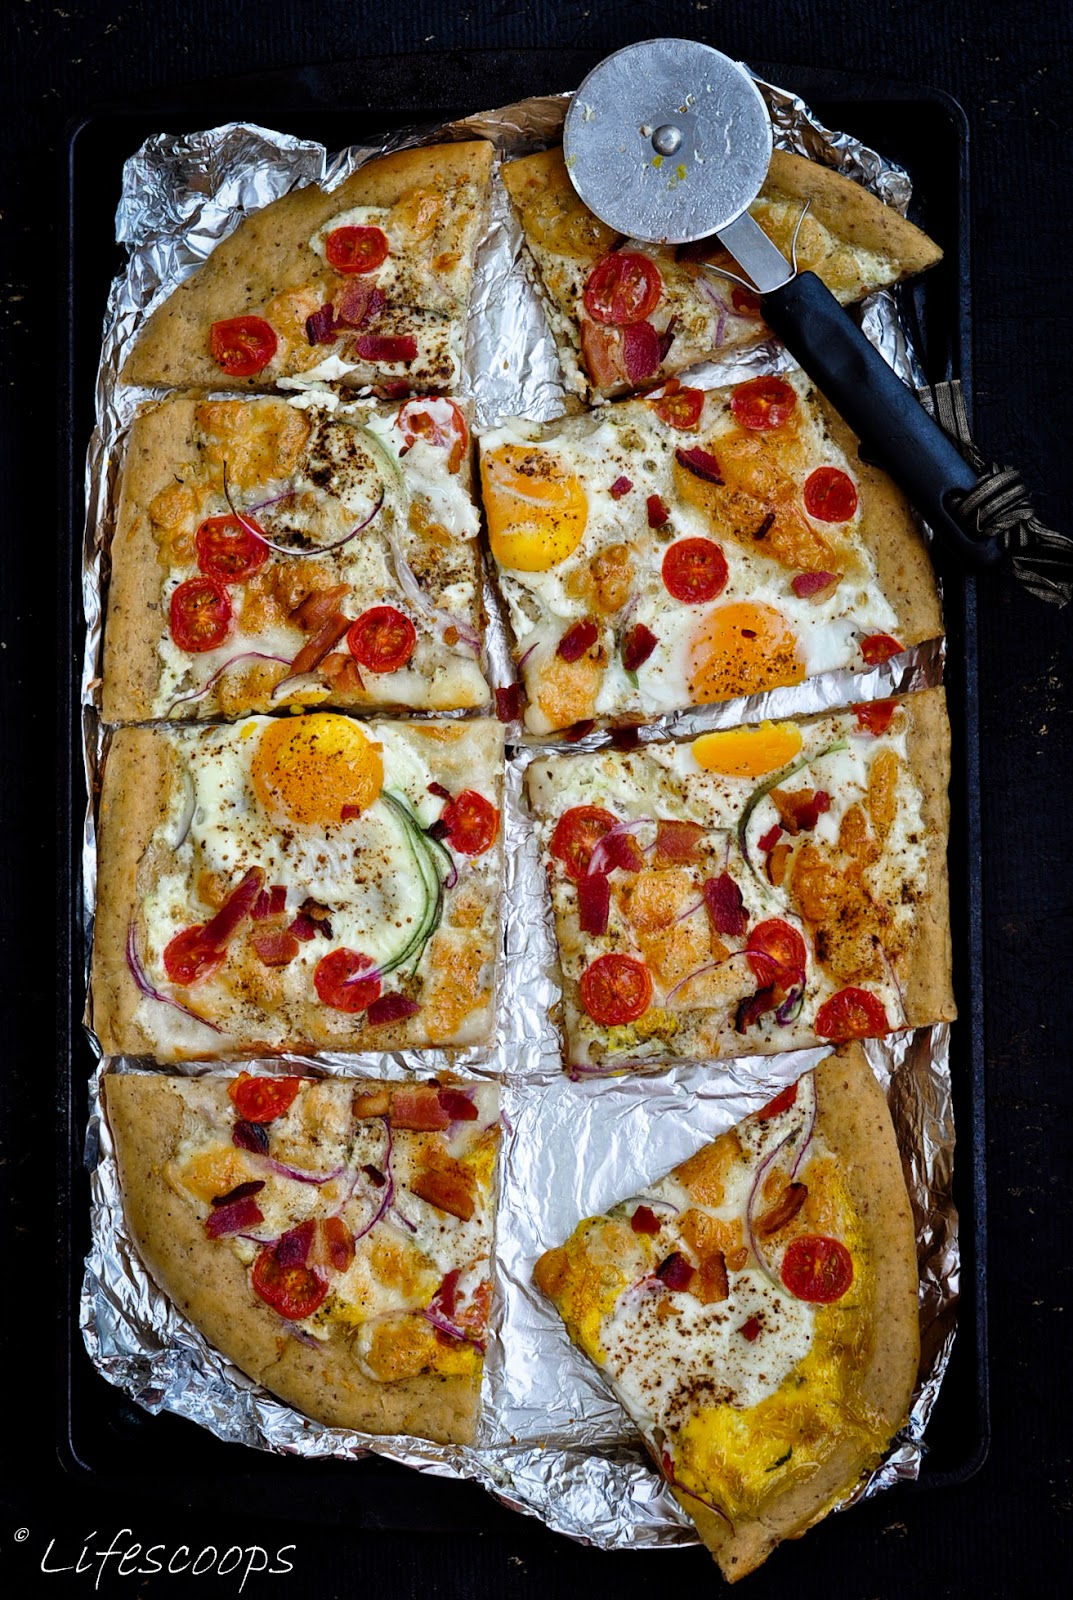 Life Scoops: Breakfast Pizza with Eggs and Bacon1073 x 1600